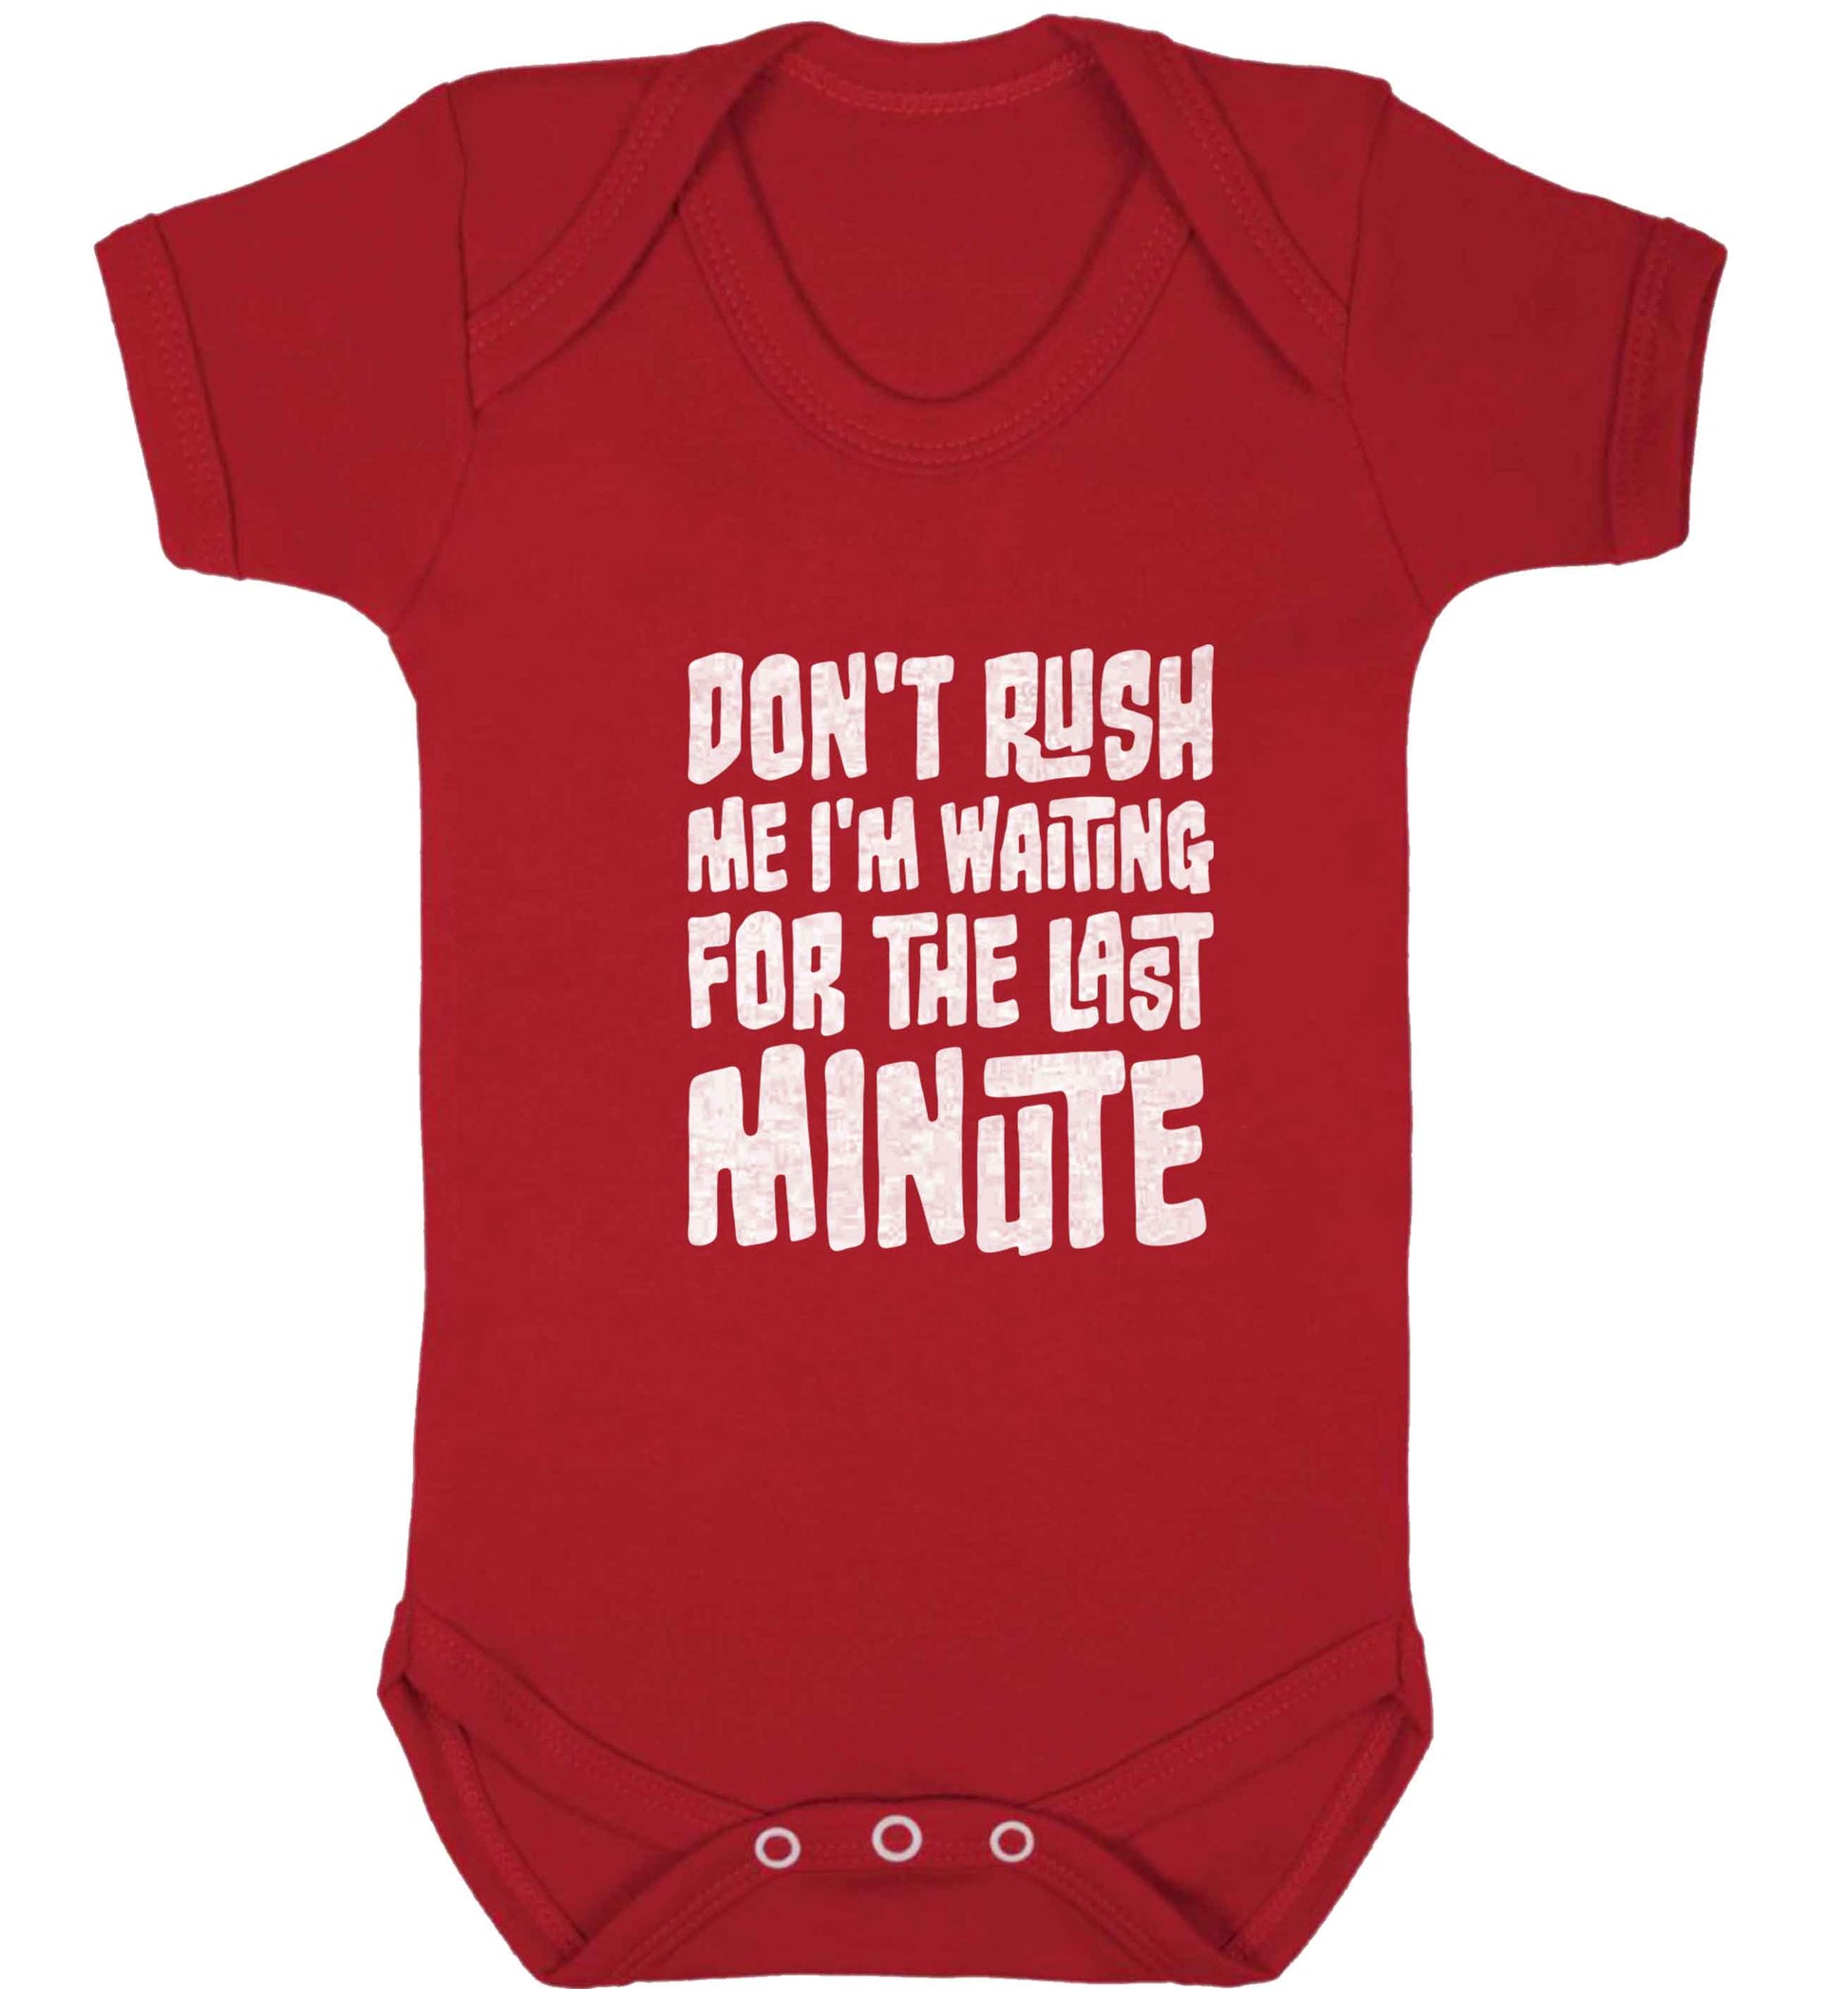 Don't rush me I'm waiting for the last minute baby vest red 18-24 months